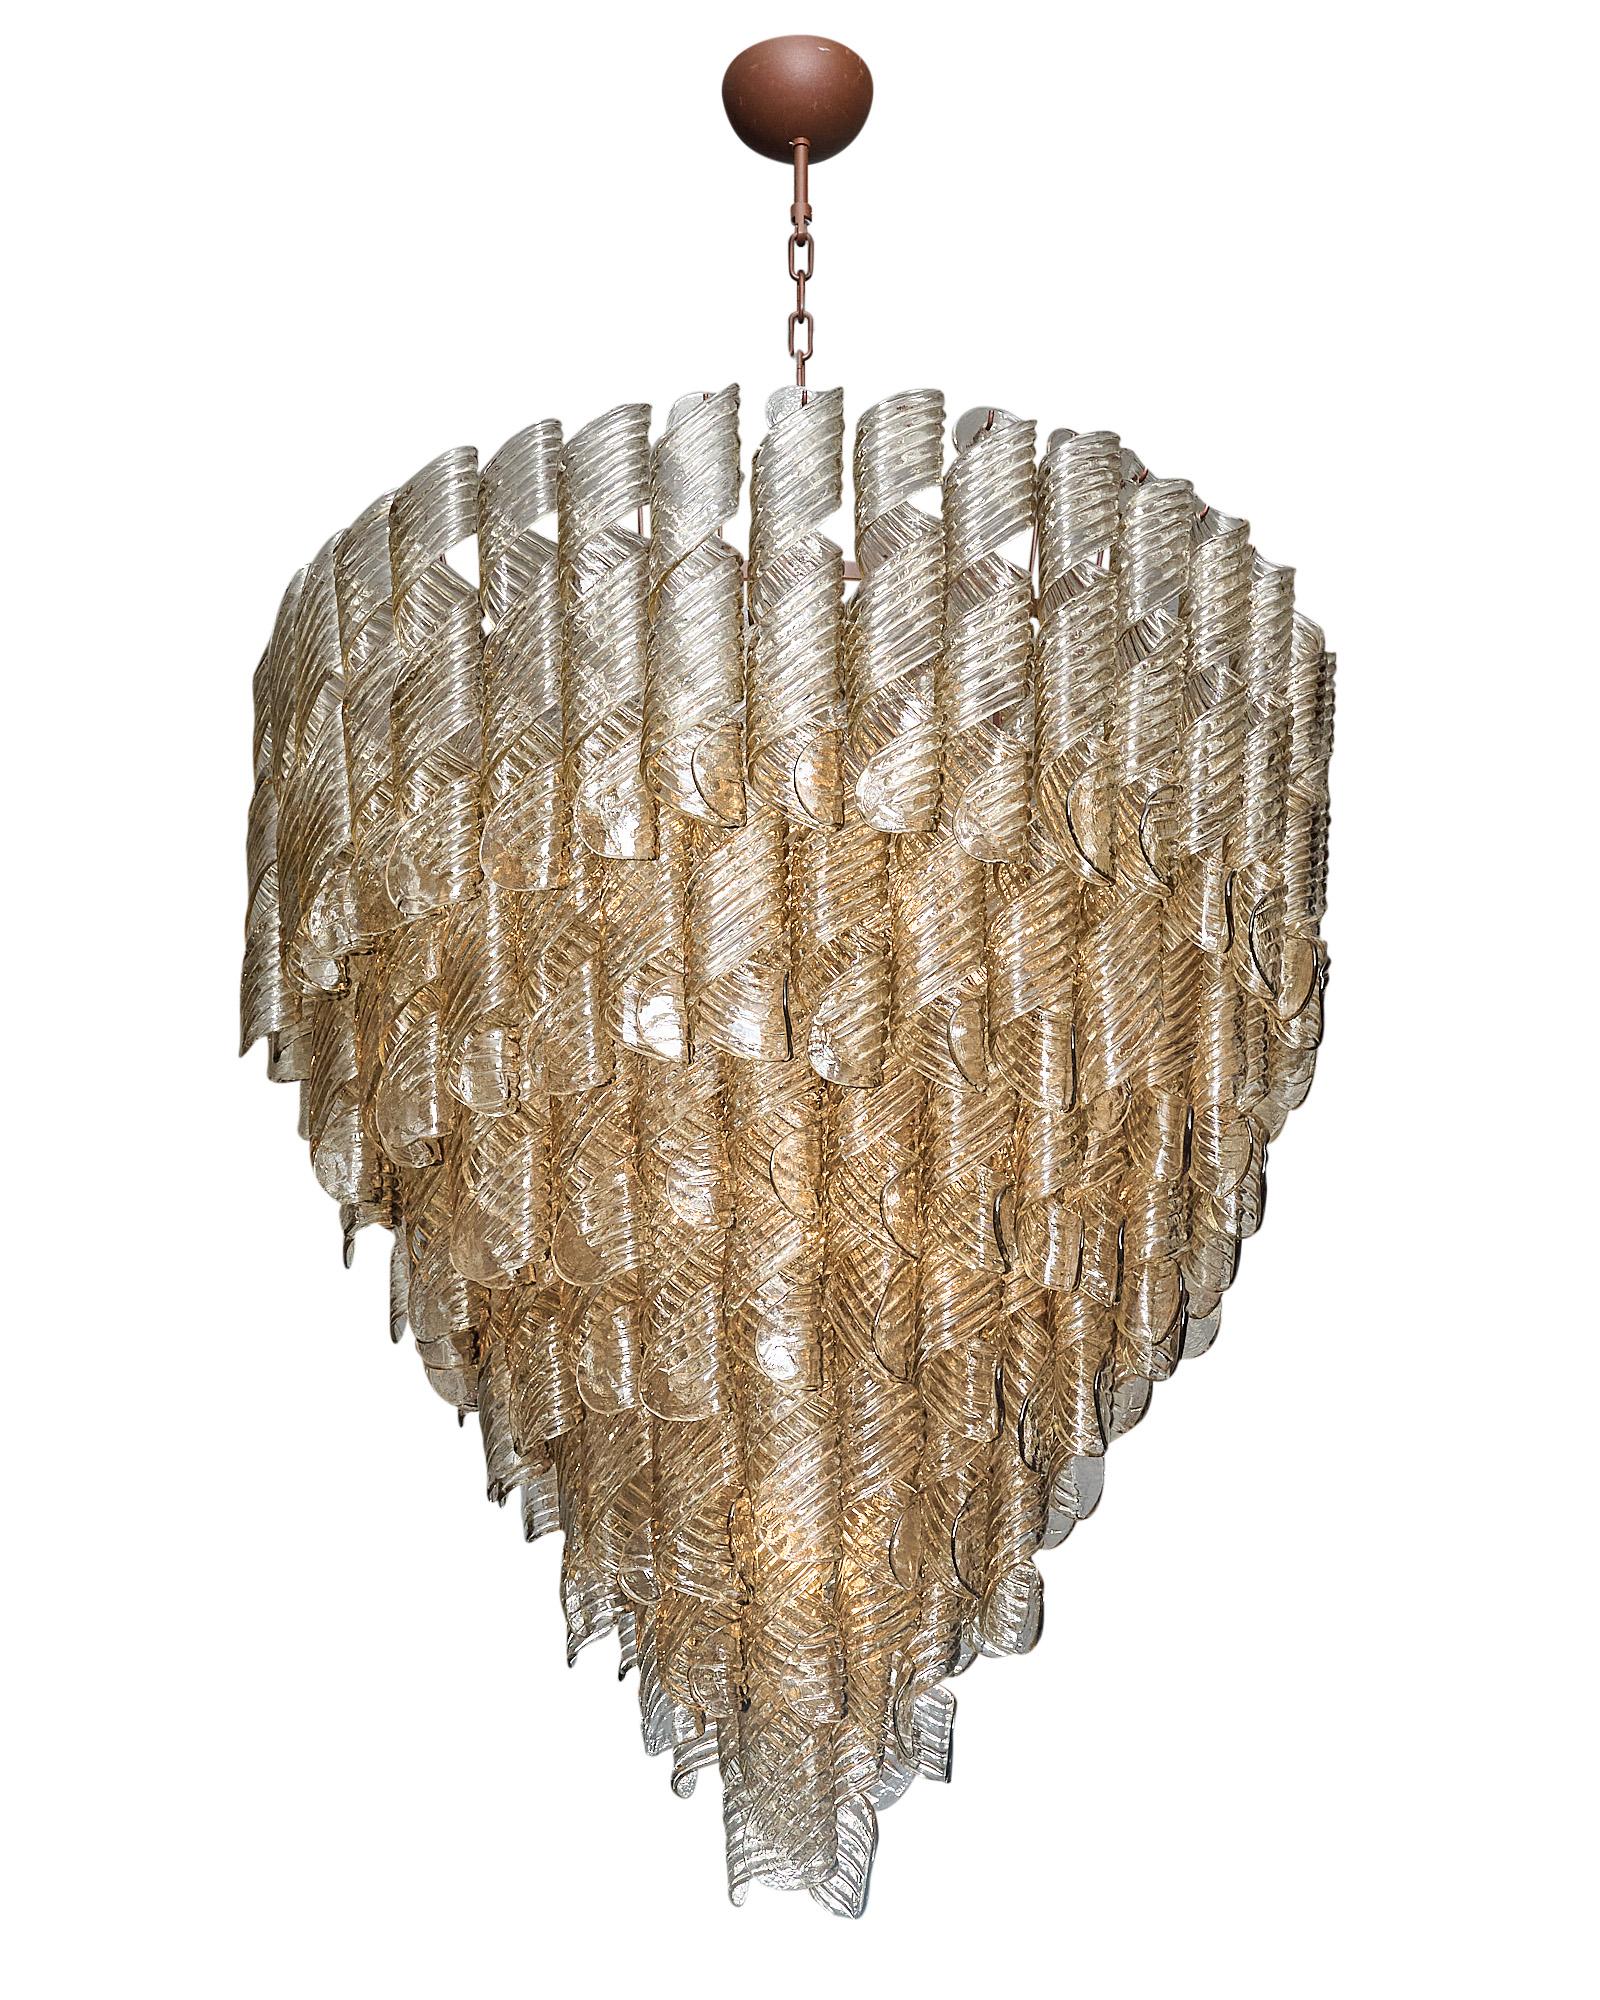 Italian Murano glass “torciglione” chandelier made with hand-blown glass elements in the “torciglione” spiraled shape. Each piece is curved and features a stamped texture on the smoked glass. This chandelier is composed of these pieces in cascading